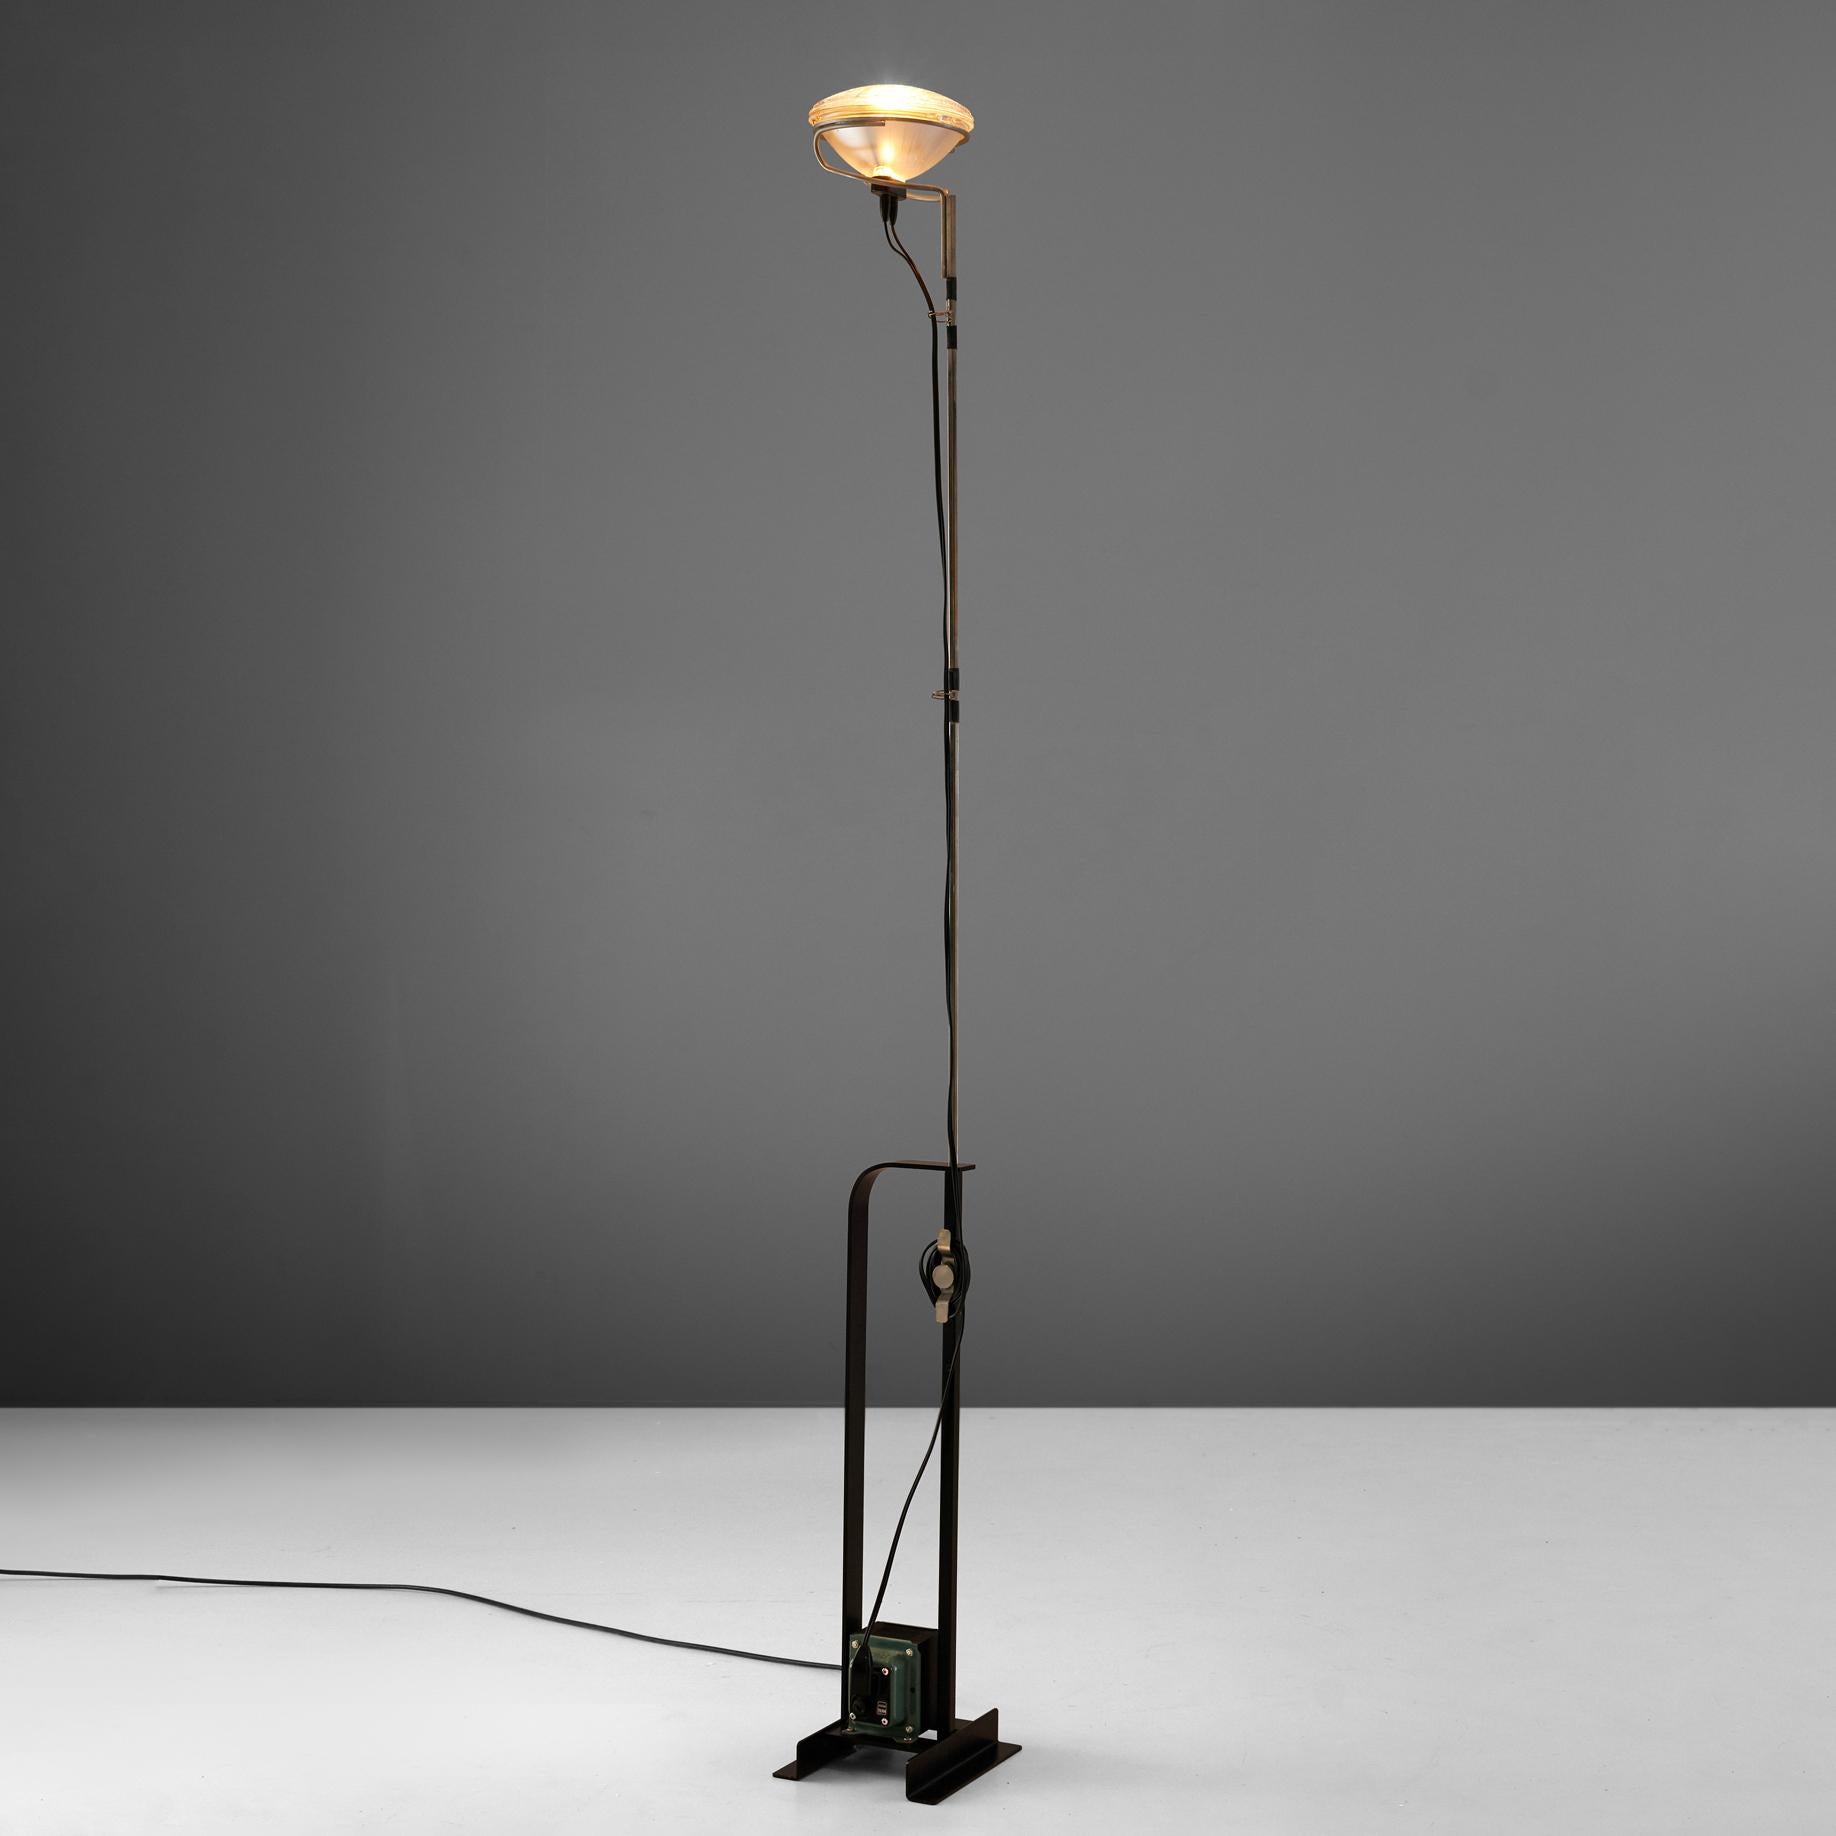 Achille & Pier Castiglioni for FLOS, 'Toio' floor lamp, metal, chrome, Italy, 1962.

A floor lamp that encompasses Castiglioni's idea of a ready-made concept. A car headlight is used as lamphead. The foot consists of a transformer, which gives the